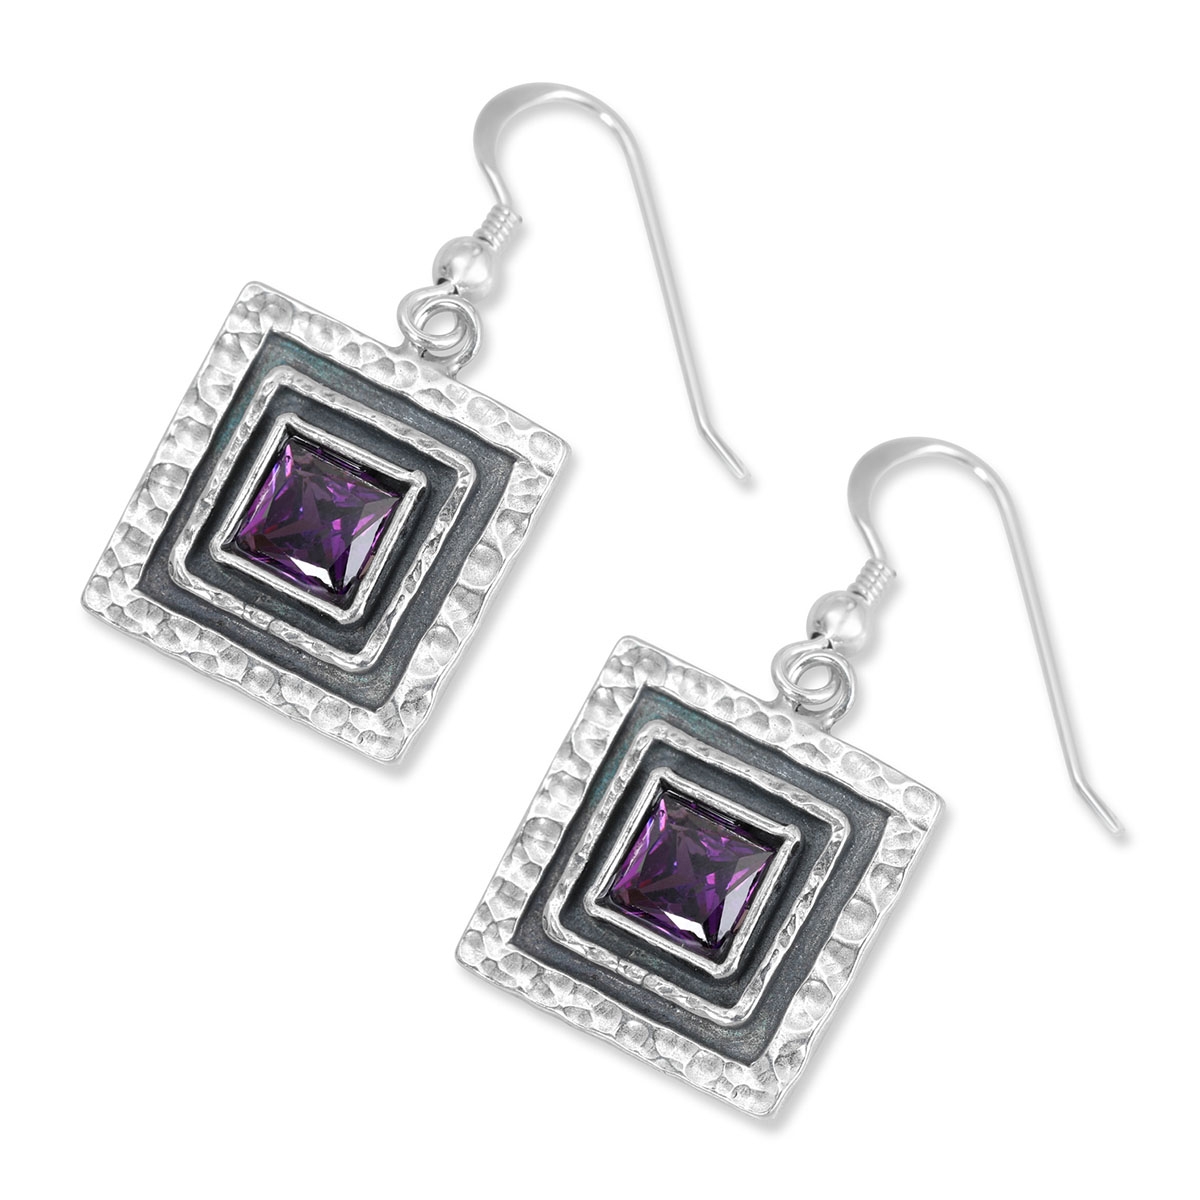 Rafael Jewelry Hammered Square Sterling Silver Earrings – Amethyst - 1